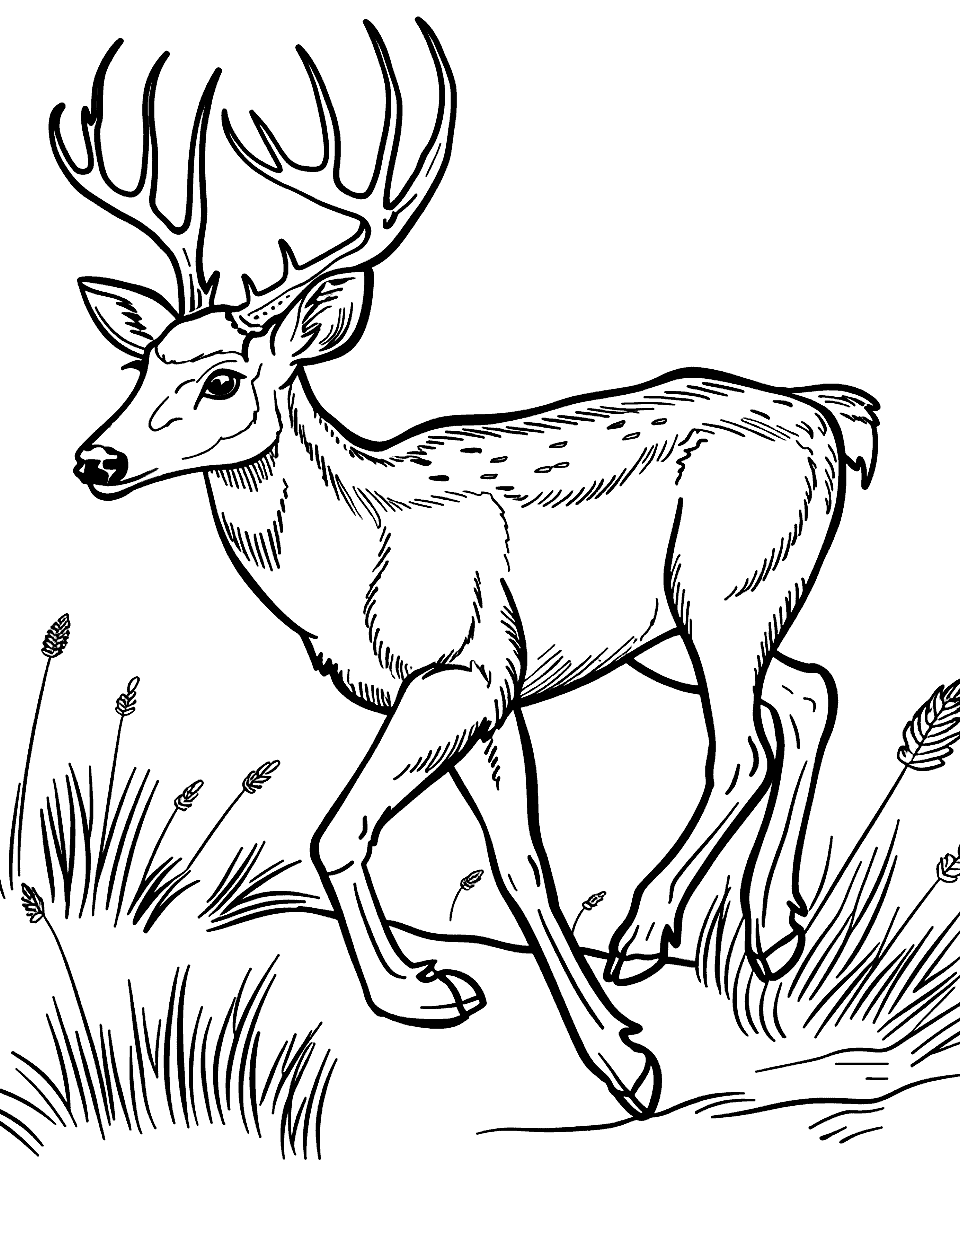 Running Deer in the Wild Coloring Page - A dynamic scene of a deer running swiftly through a meadow.